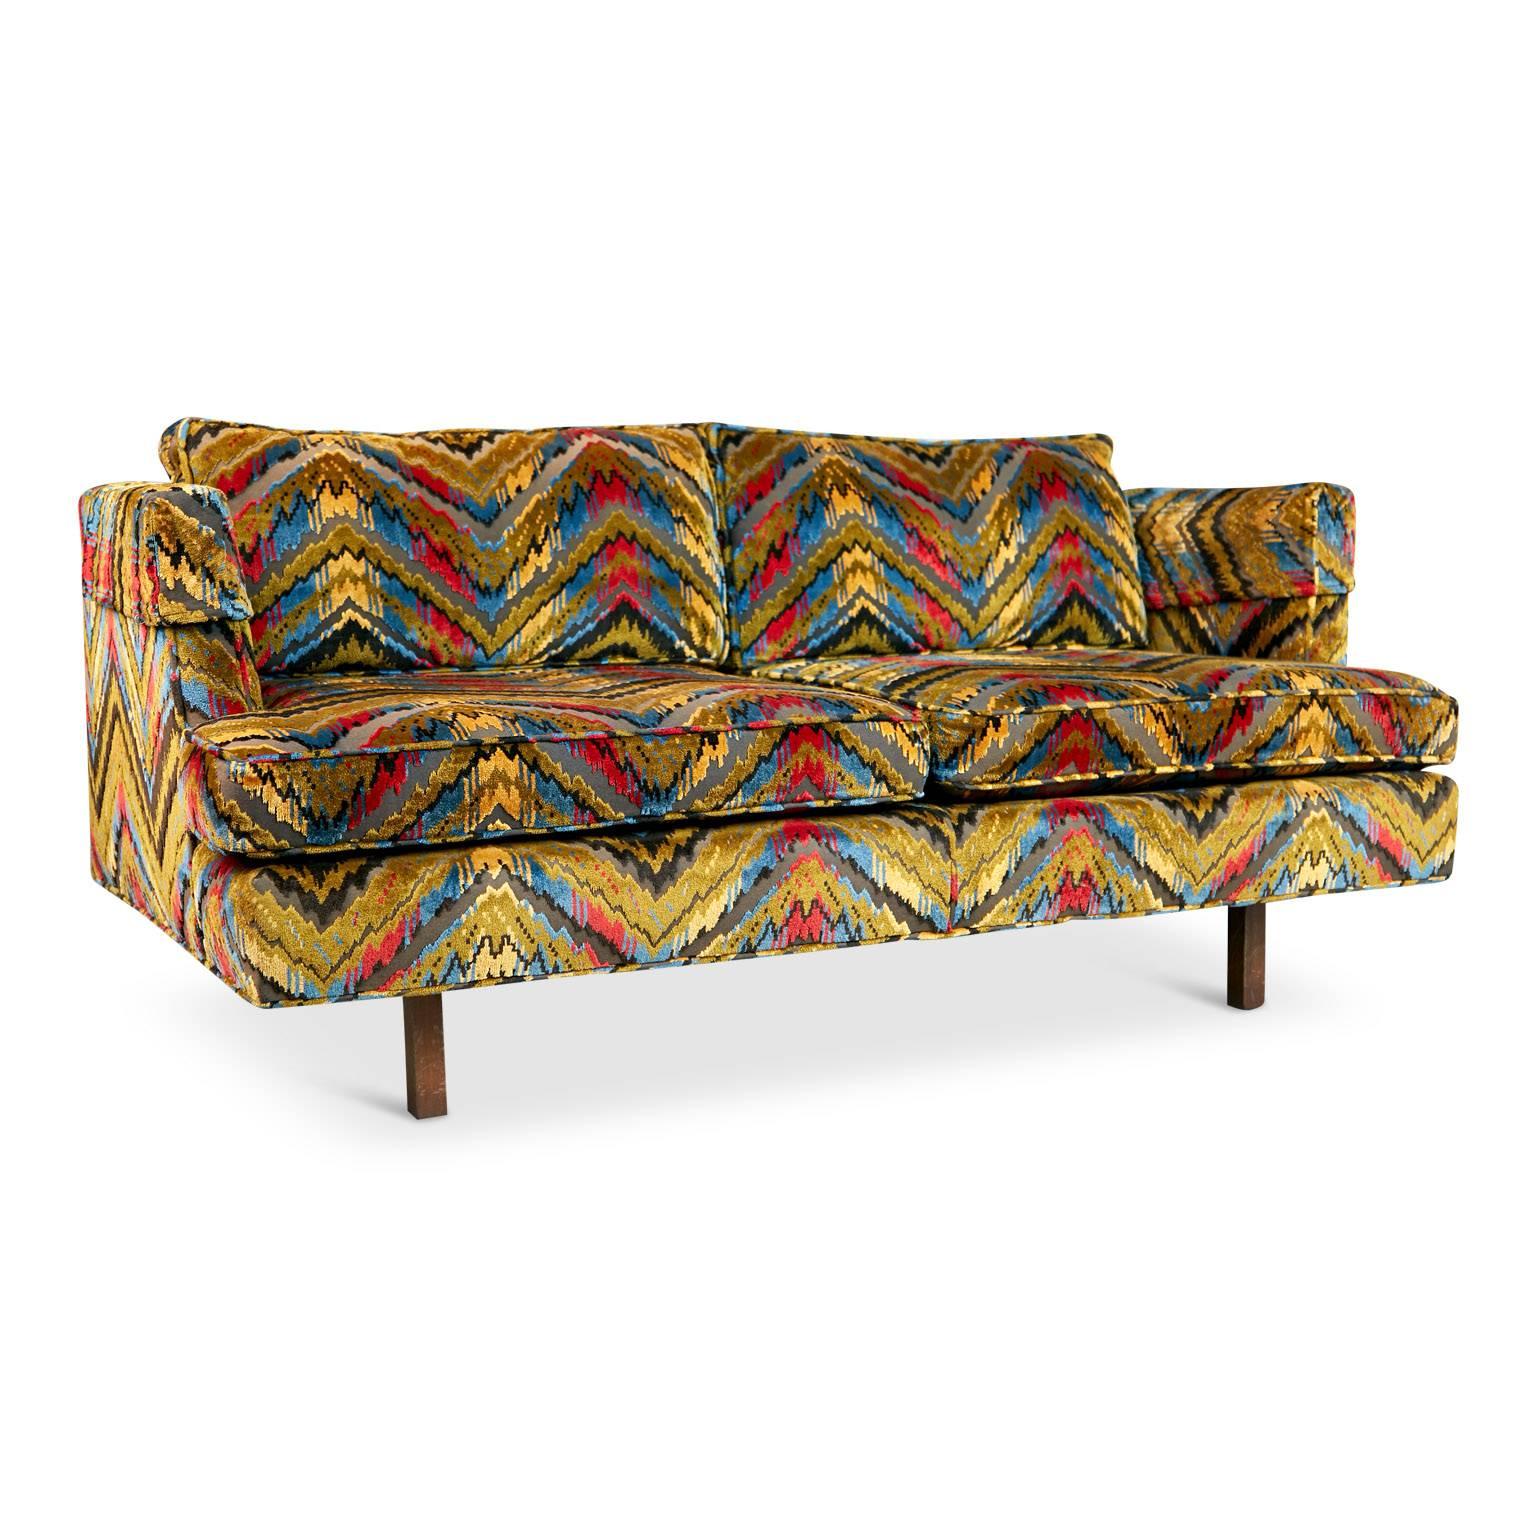 Why settle for one eye-catching sofa when you can have a pair? This set of two Edward Wormley style settees make a stunning duo which would impact any space. Both are upholstered in a quality cut velvet with a vibrant chevron pattern which